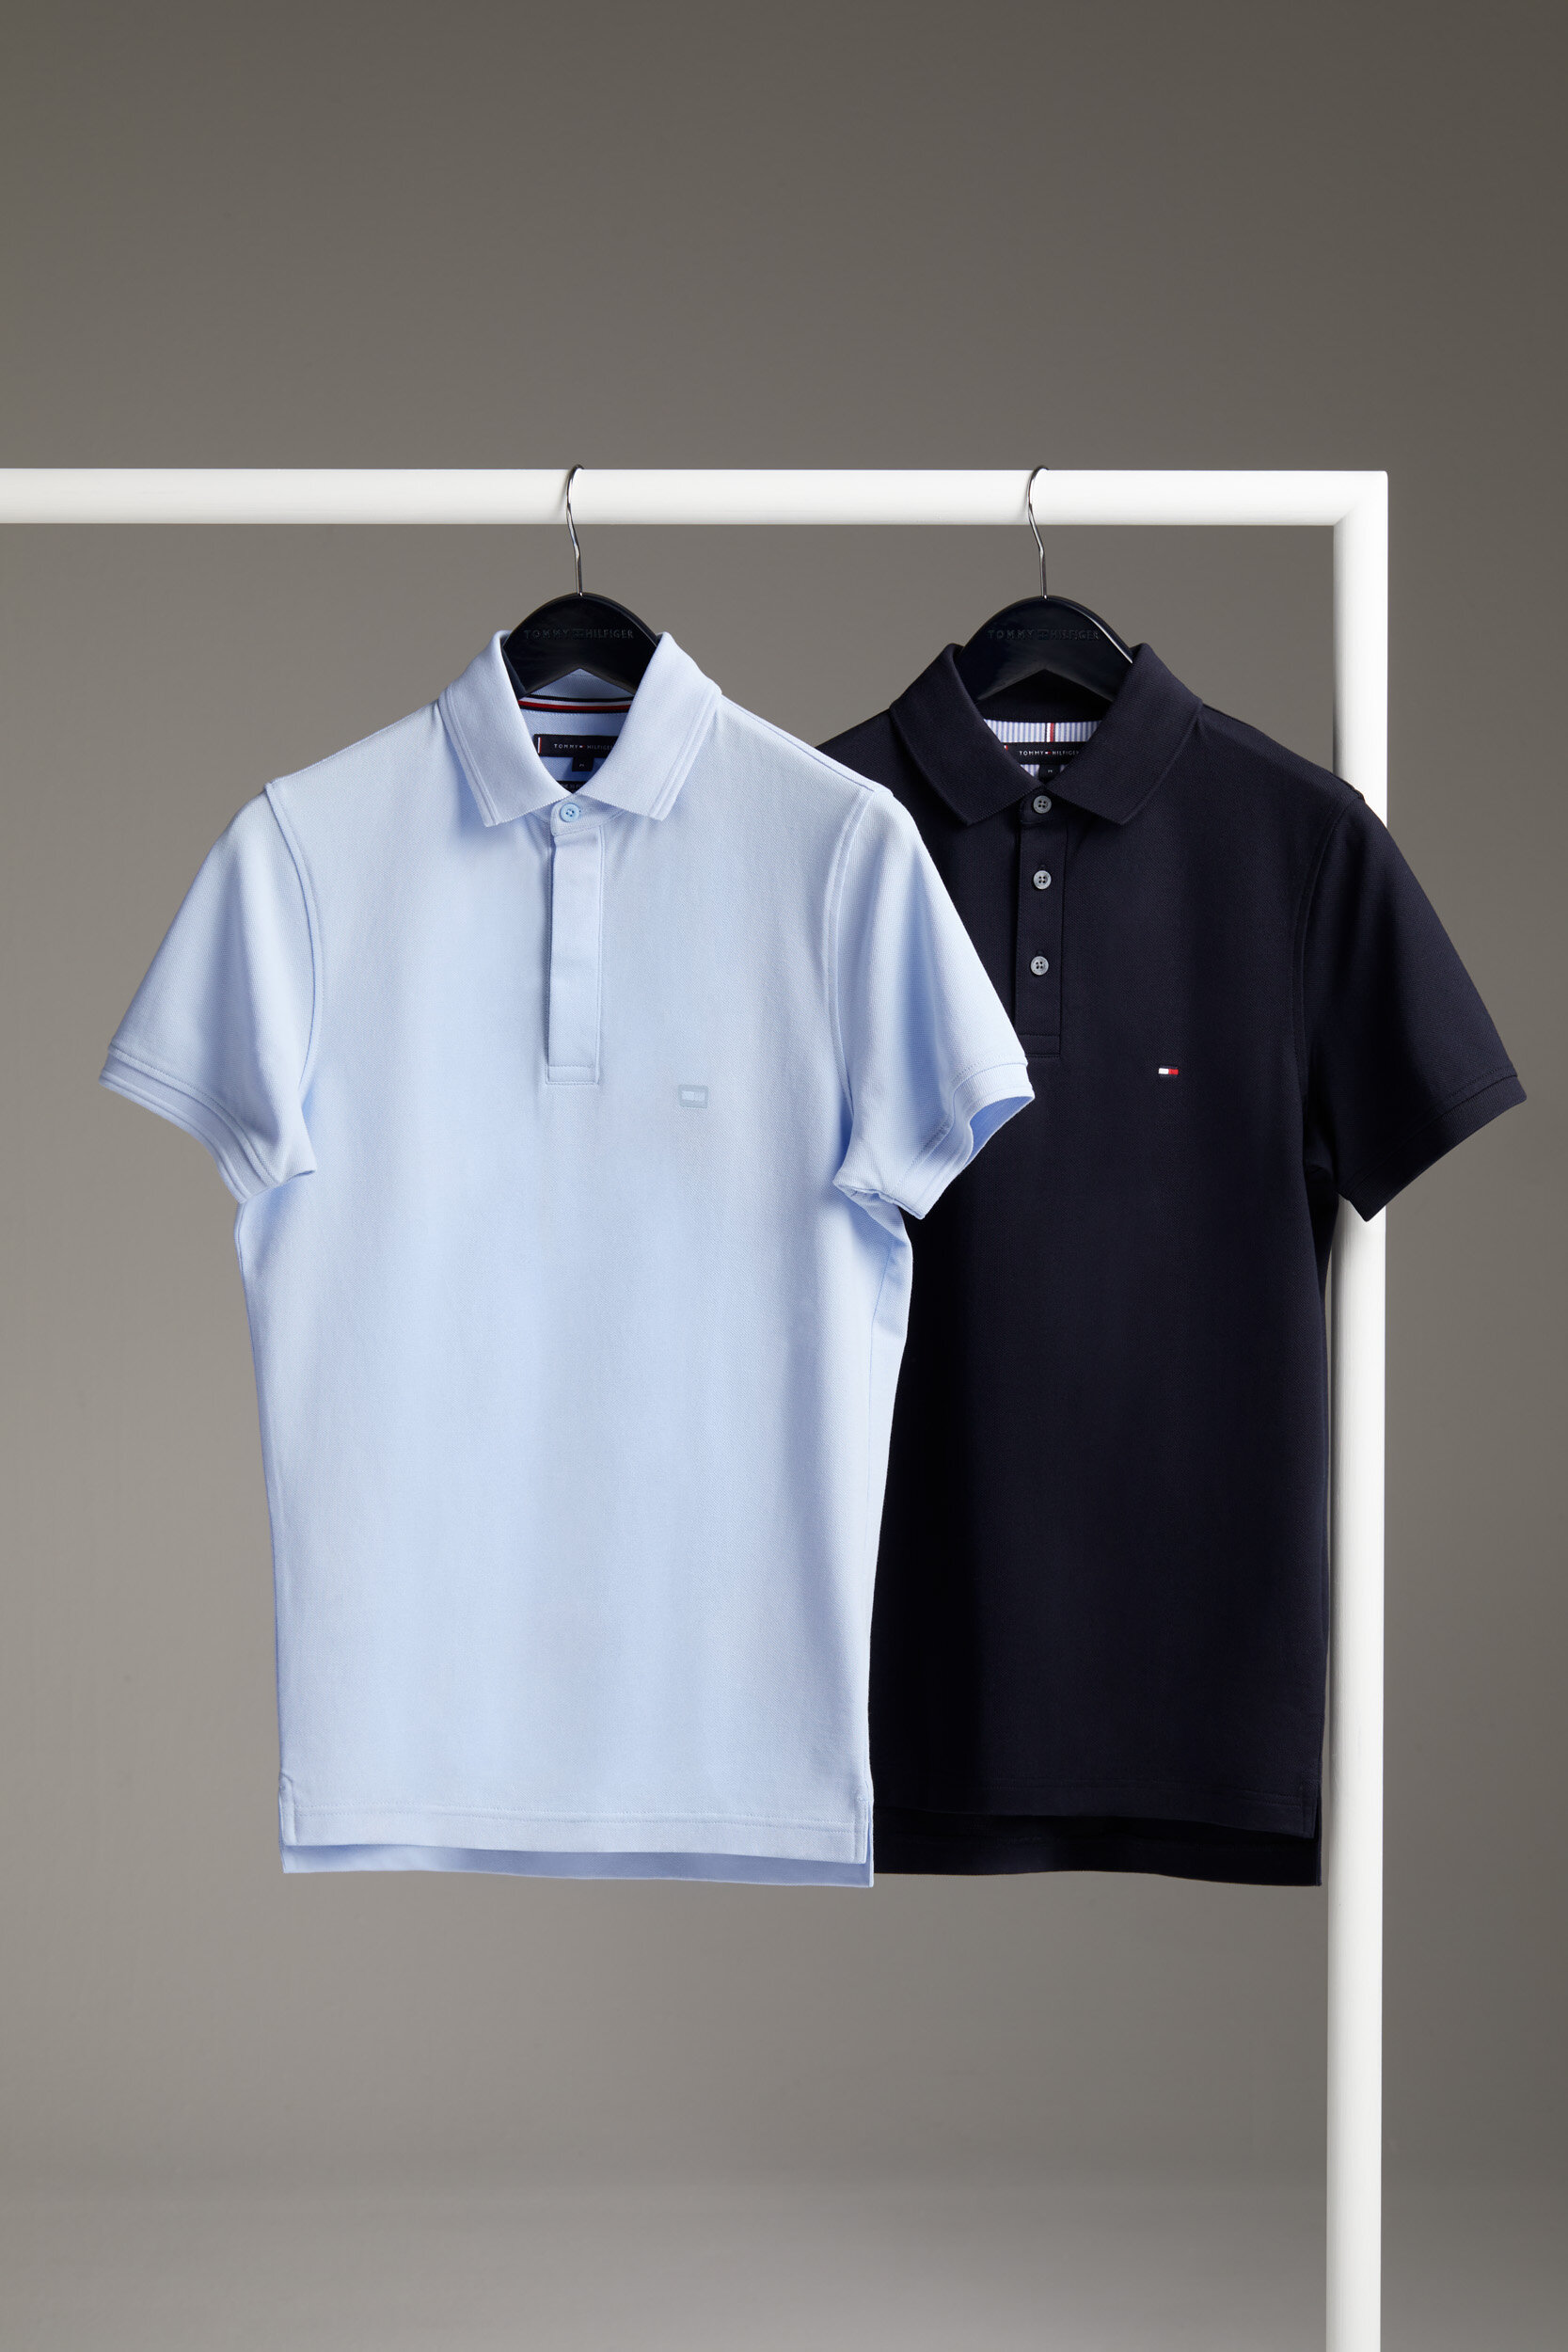 Tommy Hilfiger Spring 2021 Menswear — 1985 Polo The SSI Life 